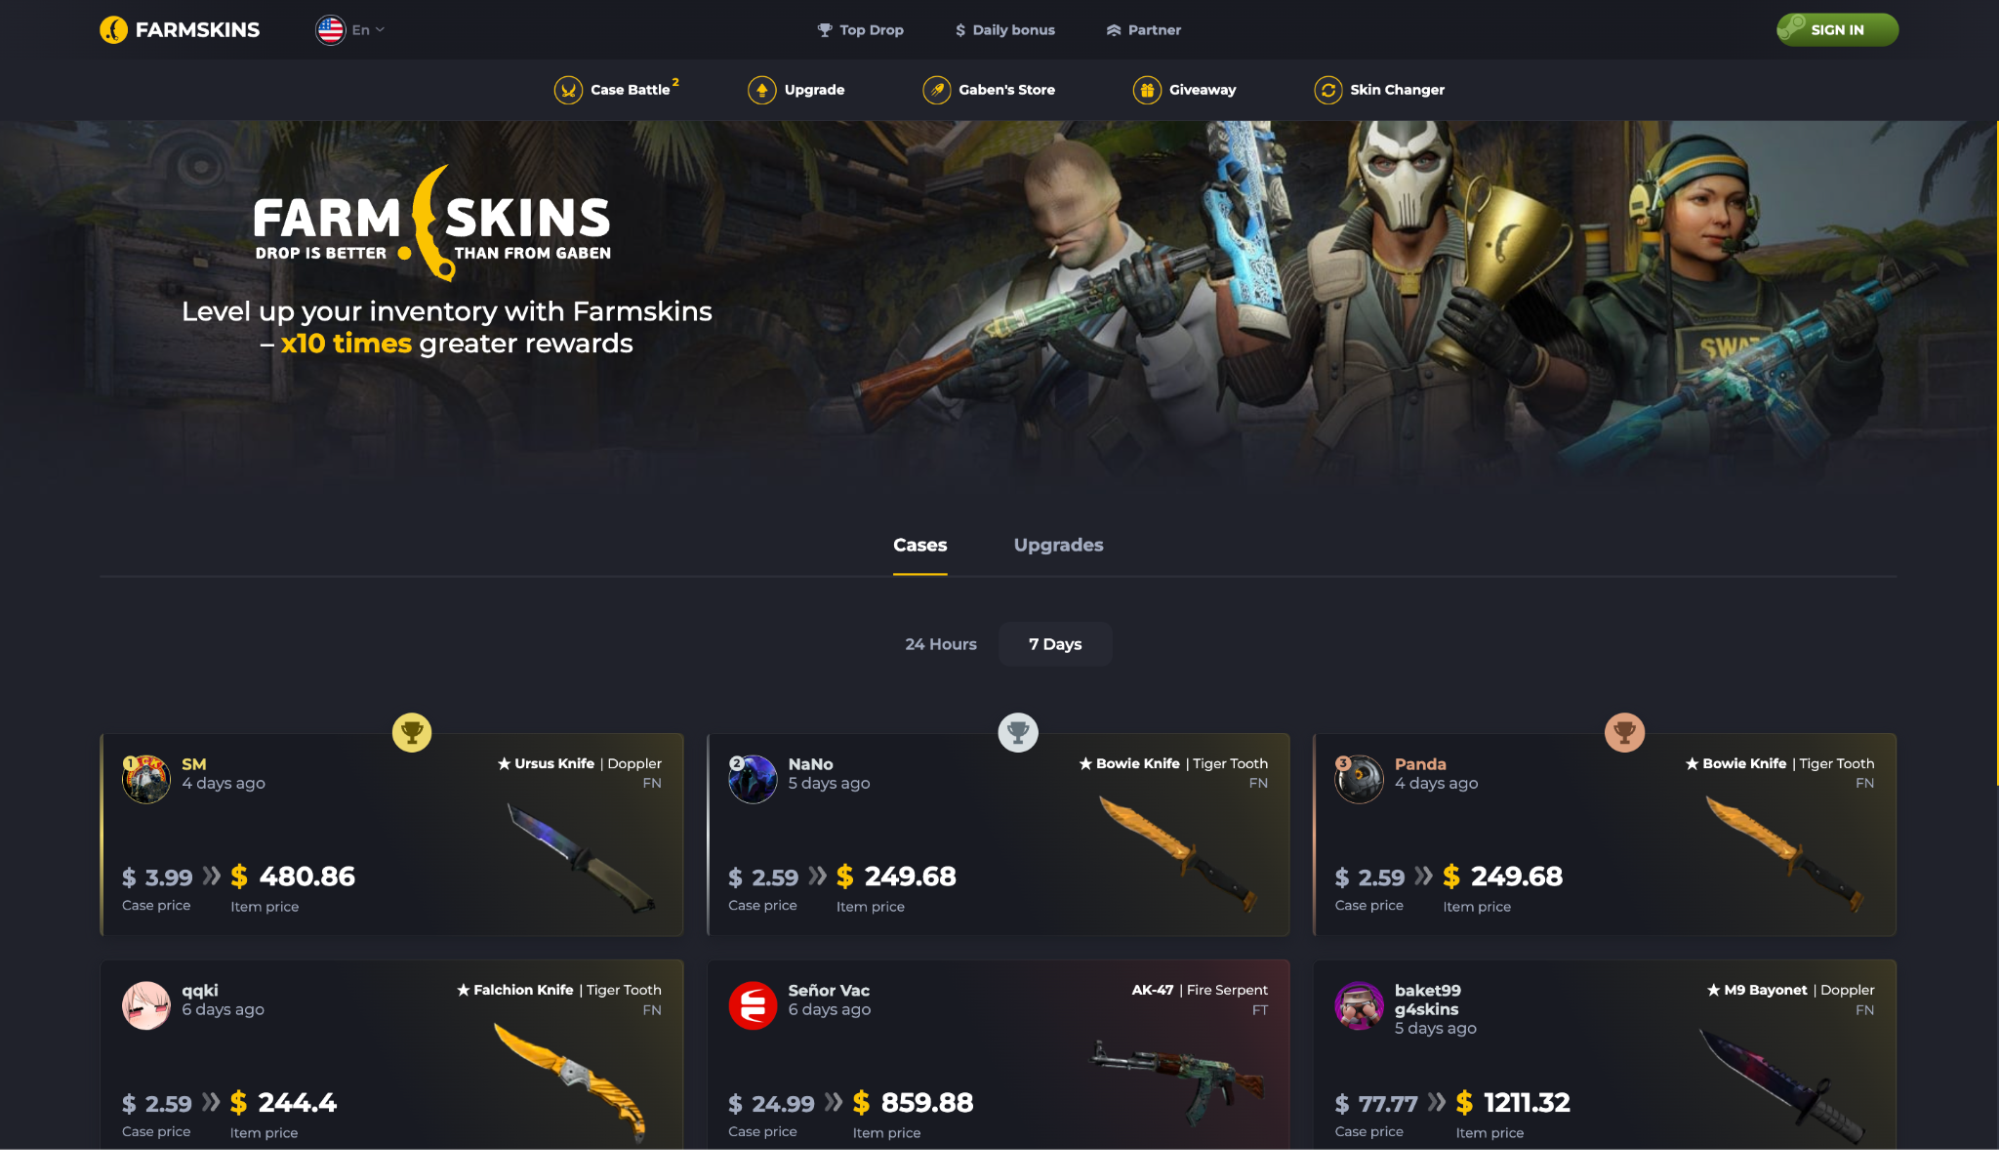 FarmSkins Promo Code for April 2024: Get Free Cases and Bonuses | CS2 Cases